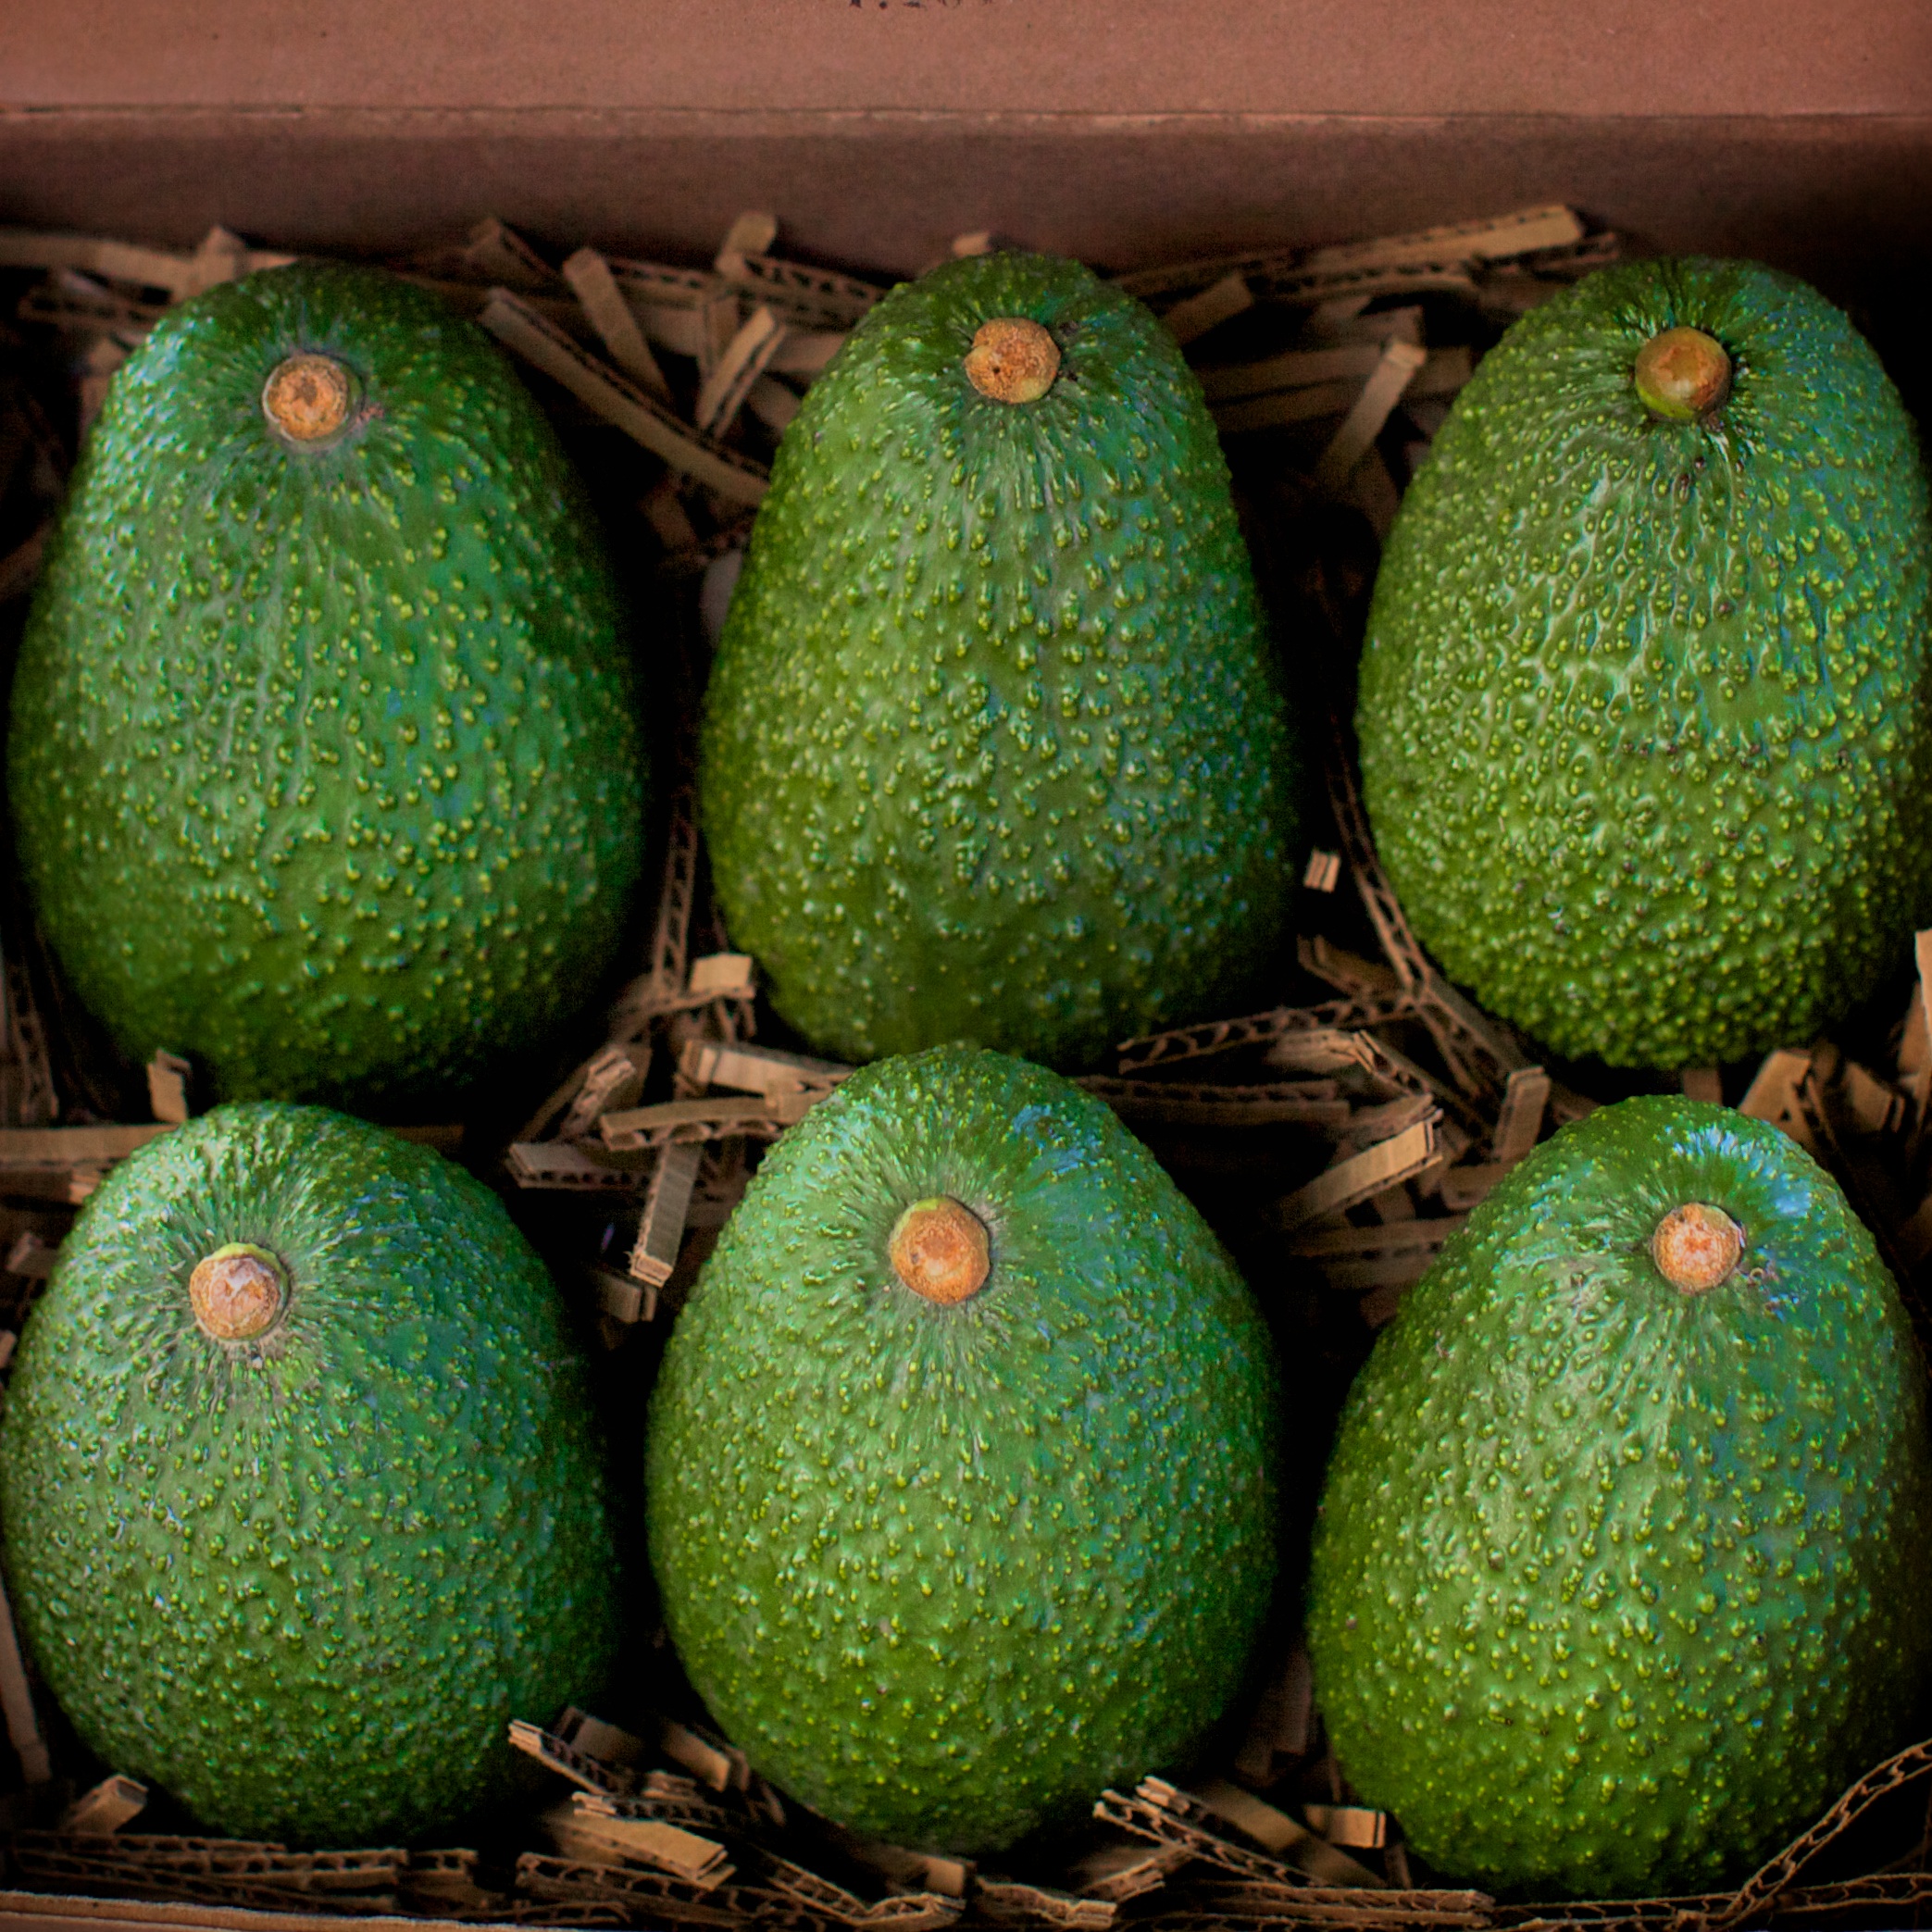 You could buy 100 boxes of avocados for the price of one bitcoin